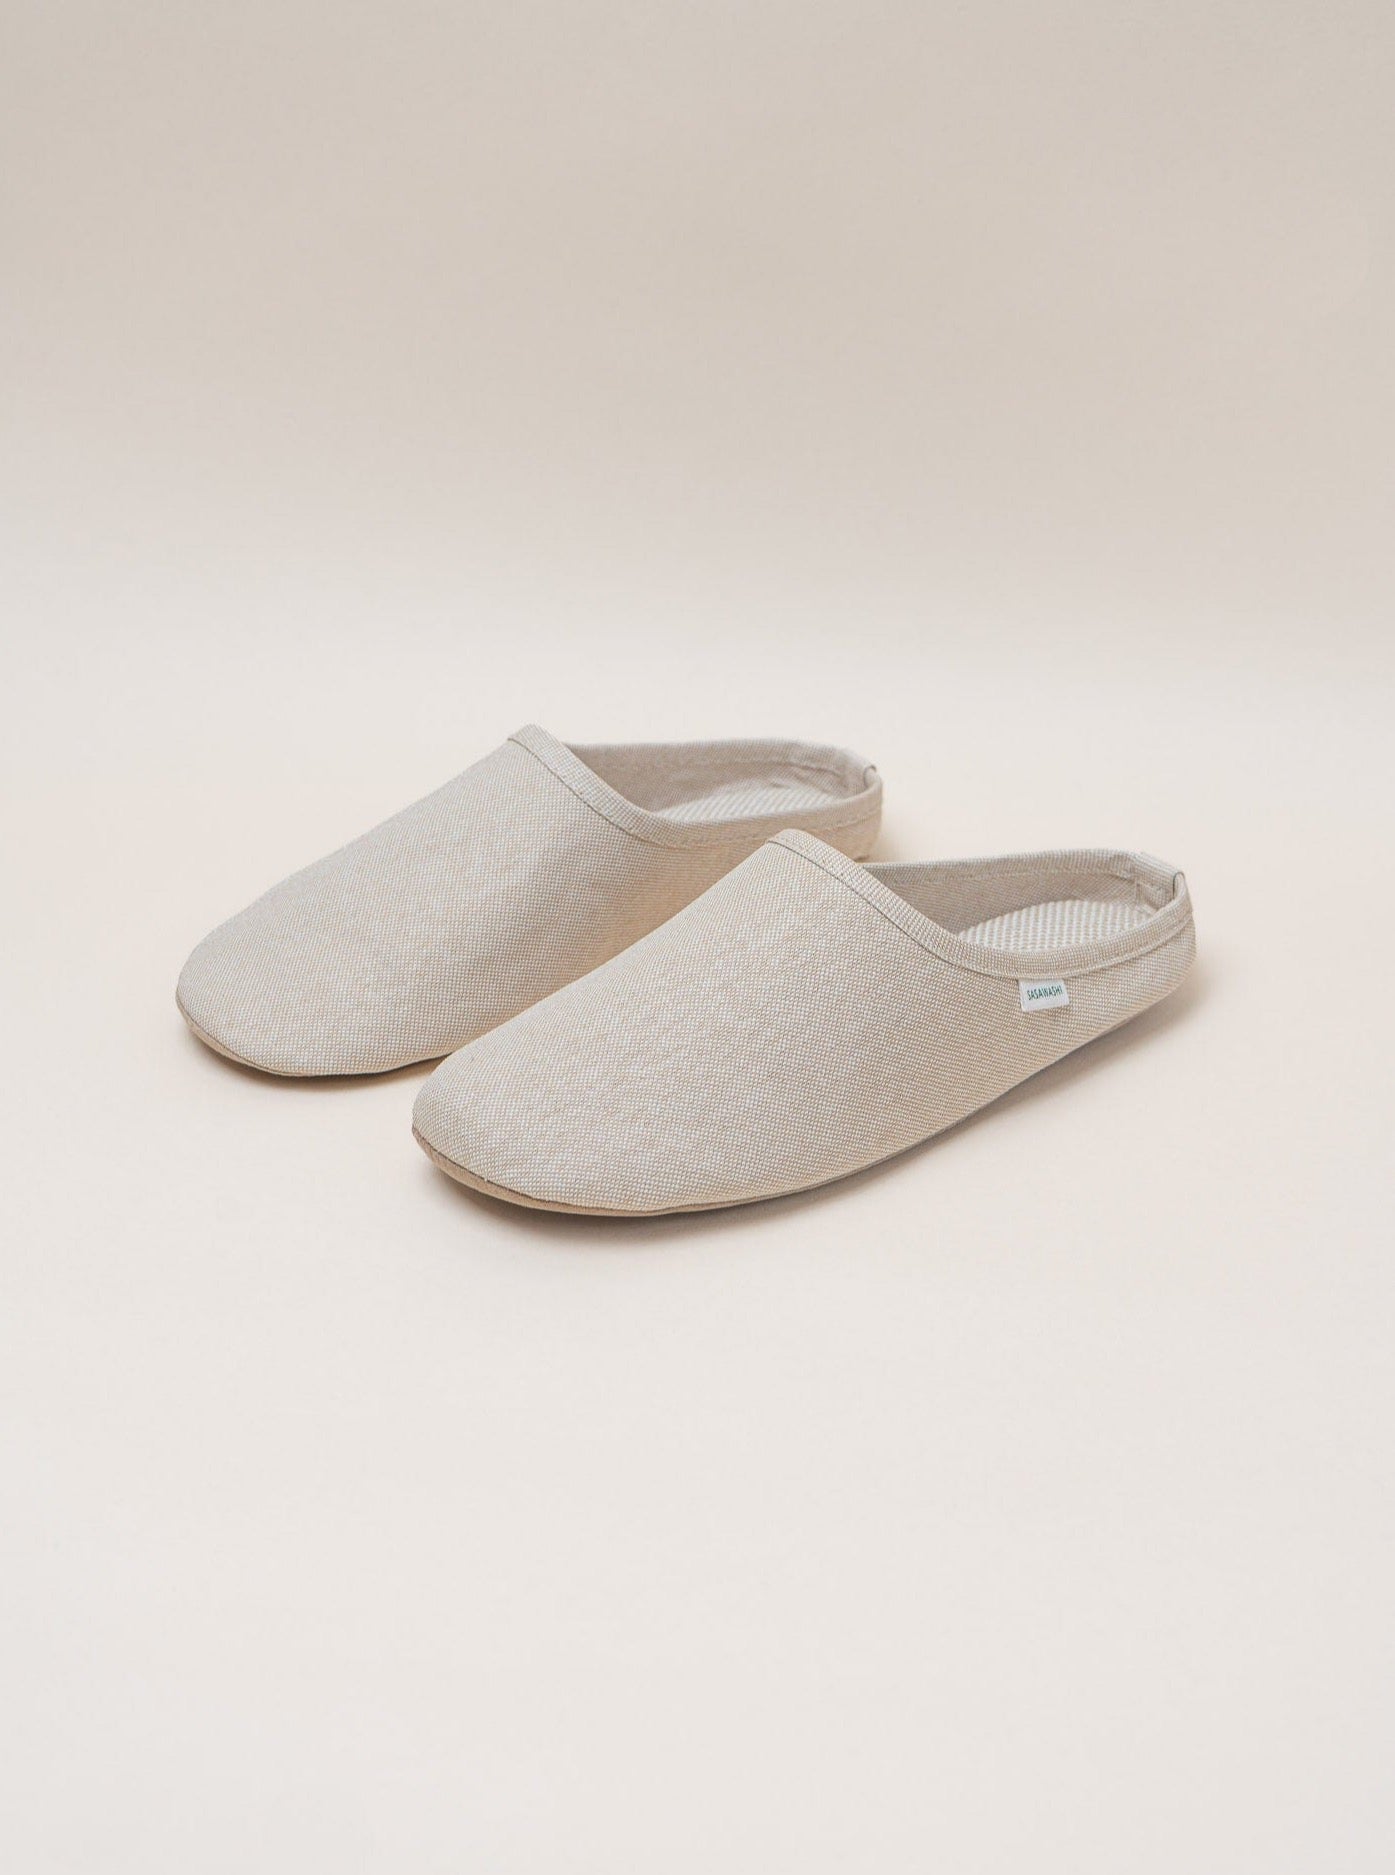 A pair of breathable beige Sasawashi Room Shoes crafted in Sasawashi fabric, on a white background.